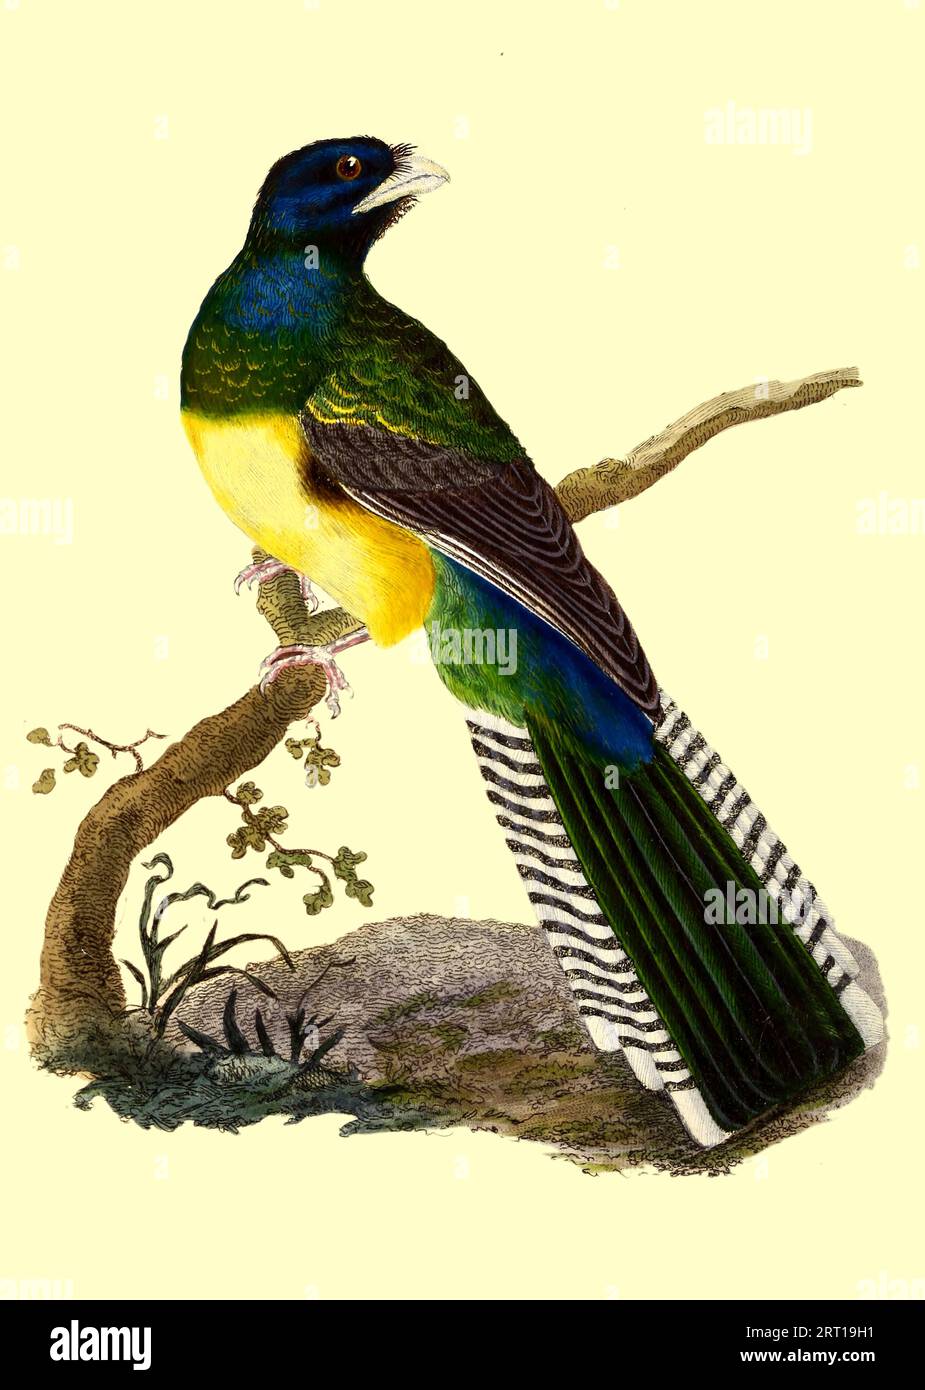 The black-throated trogon, also known as yellow-bellied trogon, (Trogon rufus) [here listed as Viridis, Trogon, Yellow-Bellied Green Trogon or Curucui is a near passerine bird in the trogon family, Trogonidae. Although it is also called 'yellow-bellied trogon' it is not the only trogon with a yellow belly. It breeds in lowlands from Honduras south to western Ecuador and northern Argentina. Coloured Plate from ' The Naturalist's repository, or, Monthly miscellany of exotic natural history by Donovan, E. (Edward), 1768-1837 Volume 1 1823 Consisting of elegantly coloured plates with appropriate s Stock Photo